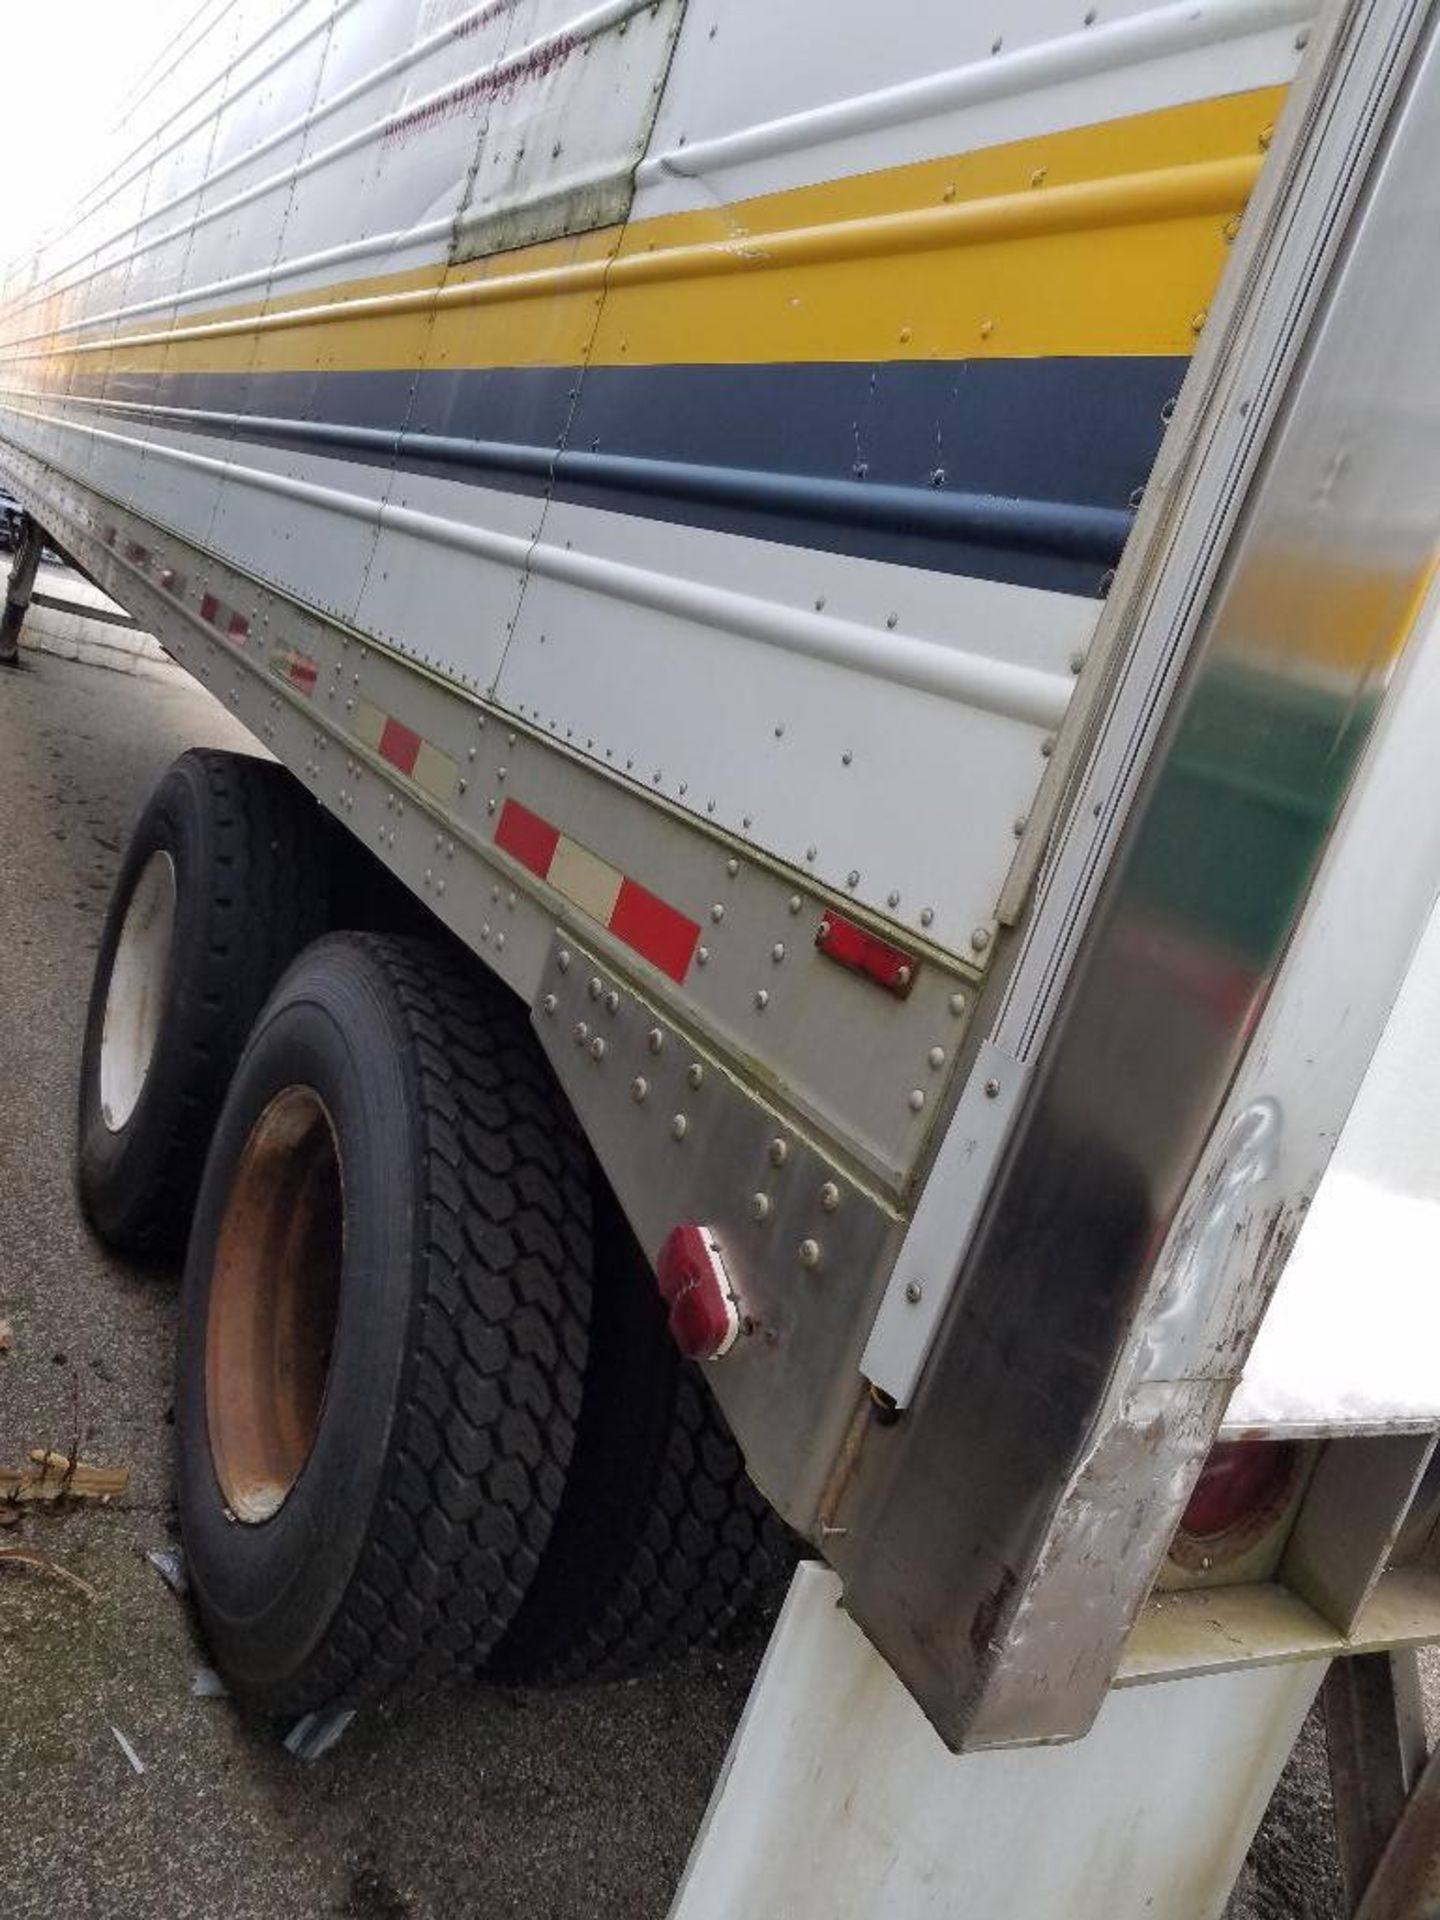 1987 Great Dane 48 ft. dry van trailer {Located in Plymouth, IN} - Image 12 of 14